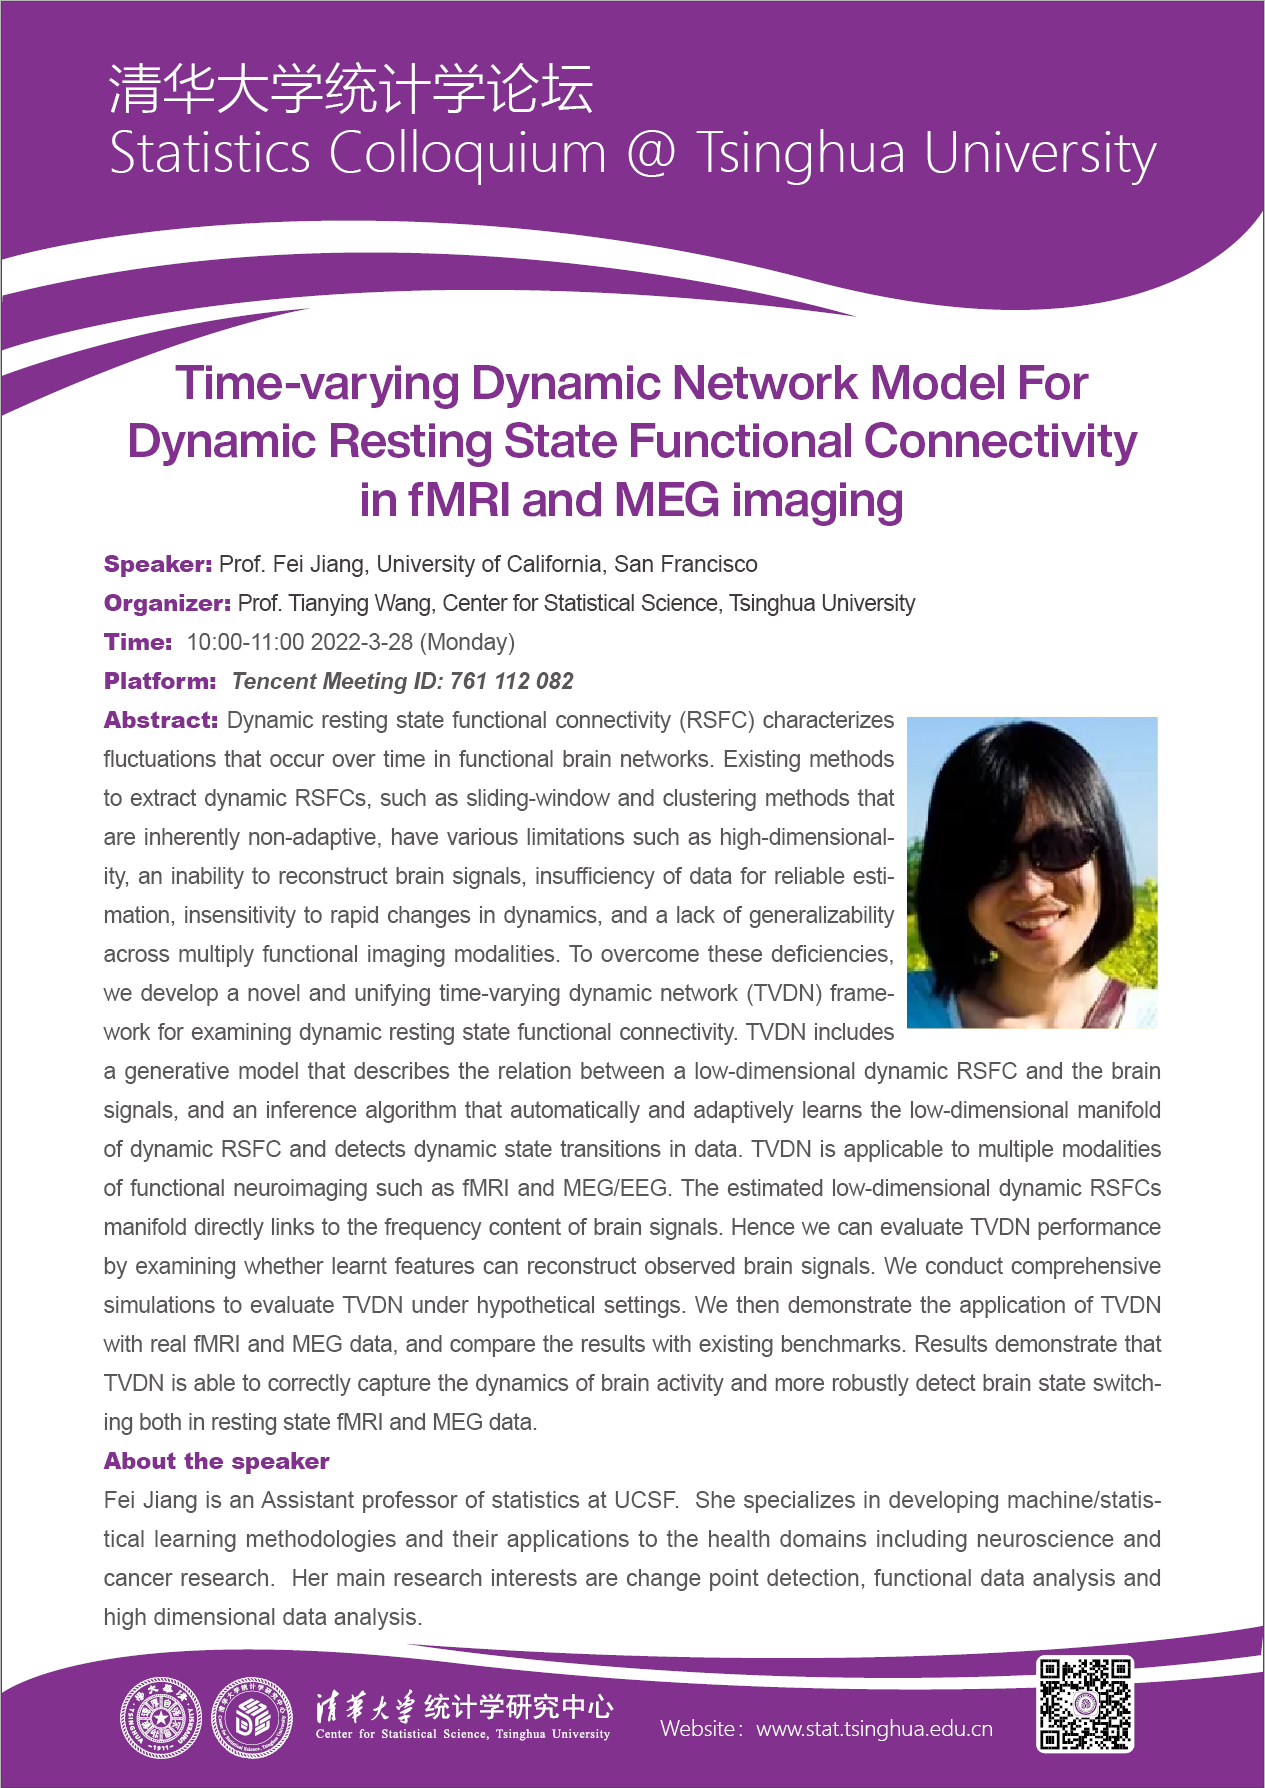 Time-varying Dynamic Network Model For Dynamic Resting State Functional Connectivity in fMRI and MEG imaging